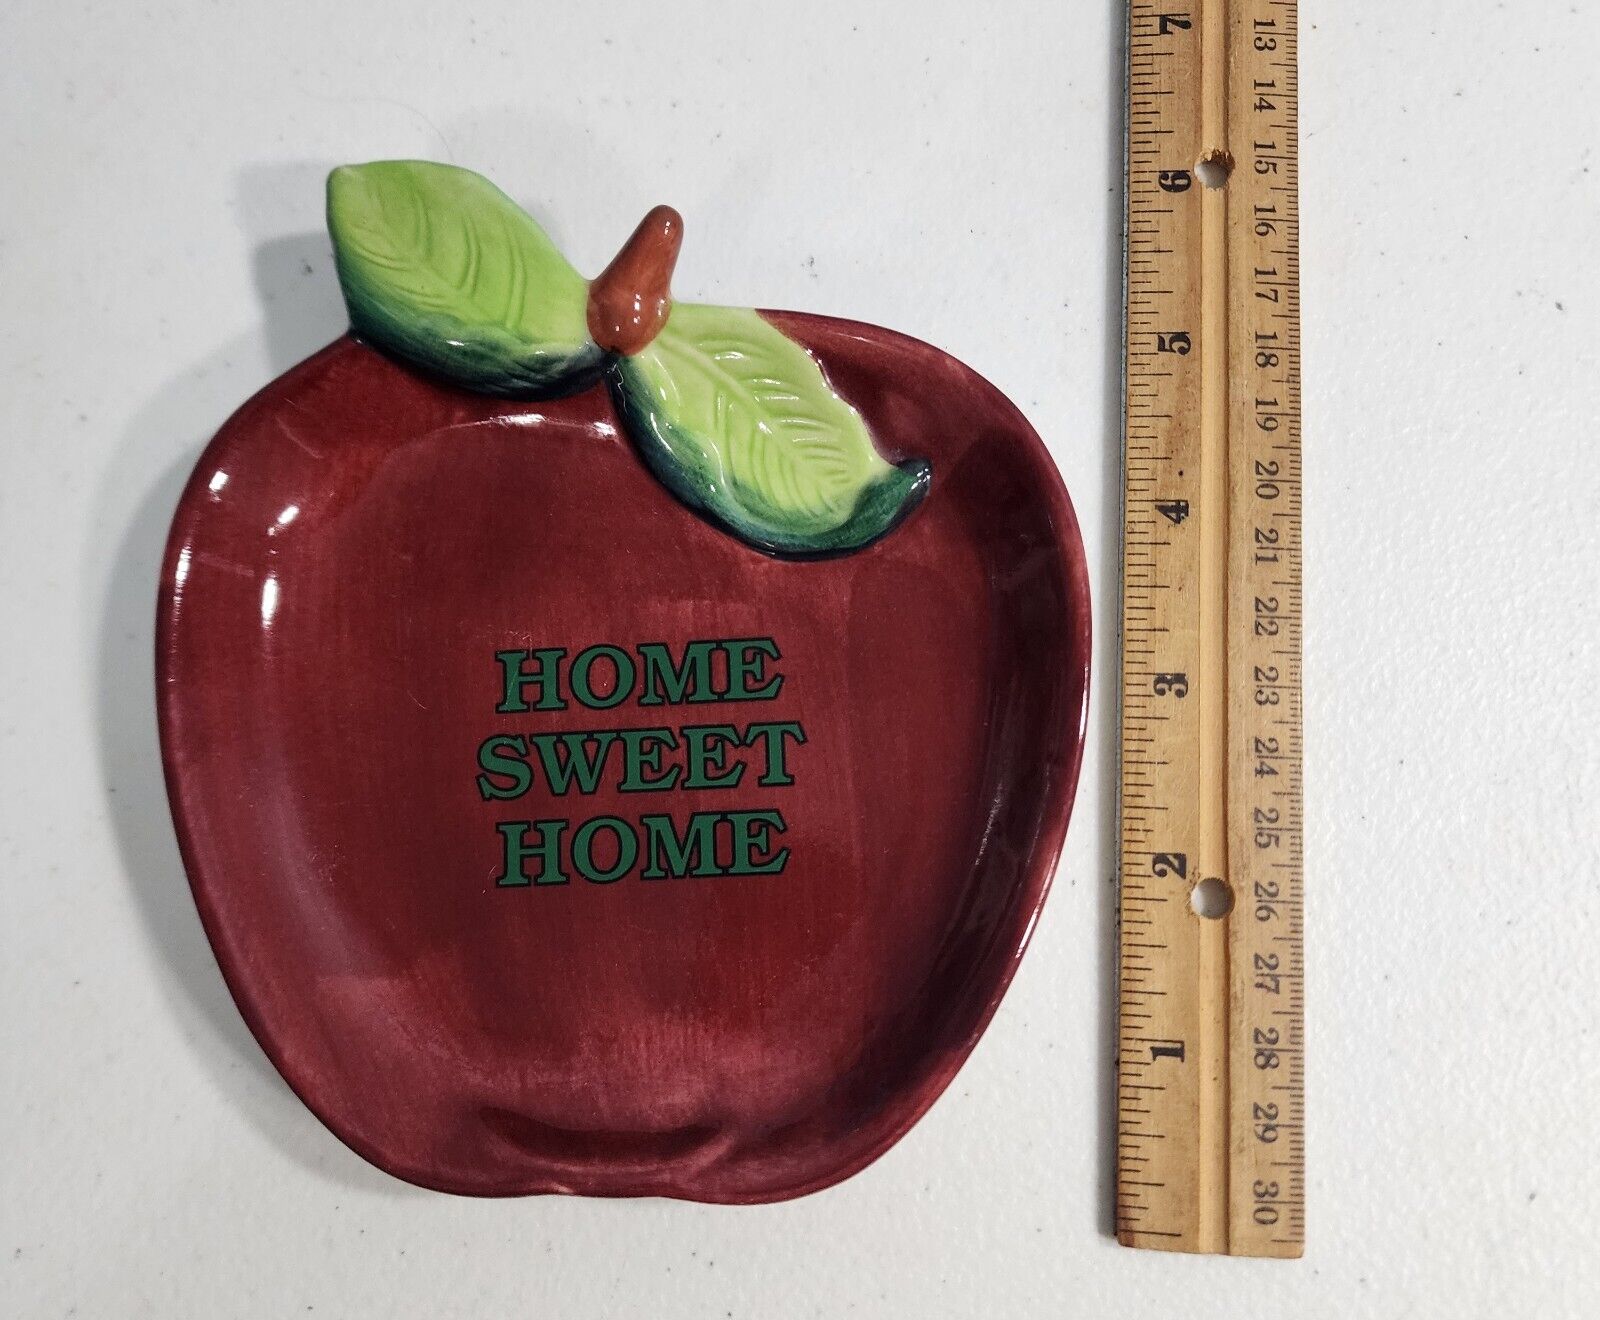 Vintage Home Sweet Home Apple Ceramic Wall Hanging Decor  Sign Papel Freelance